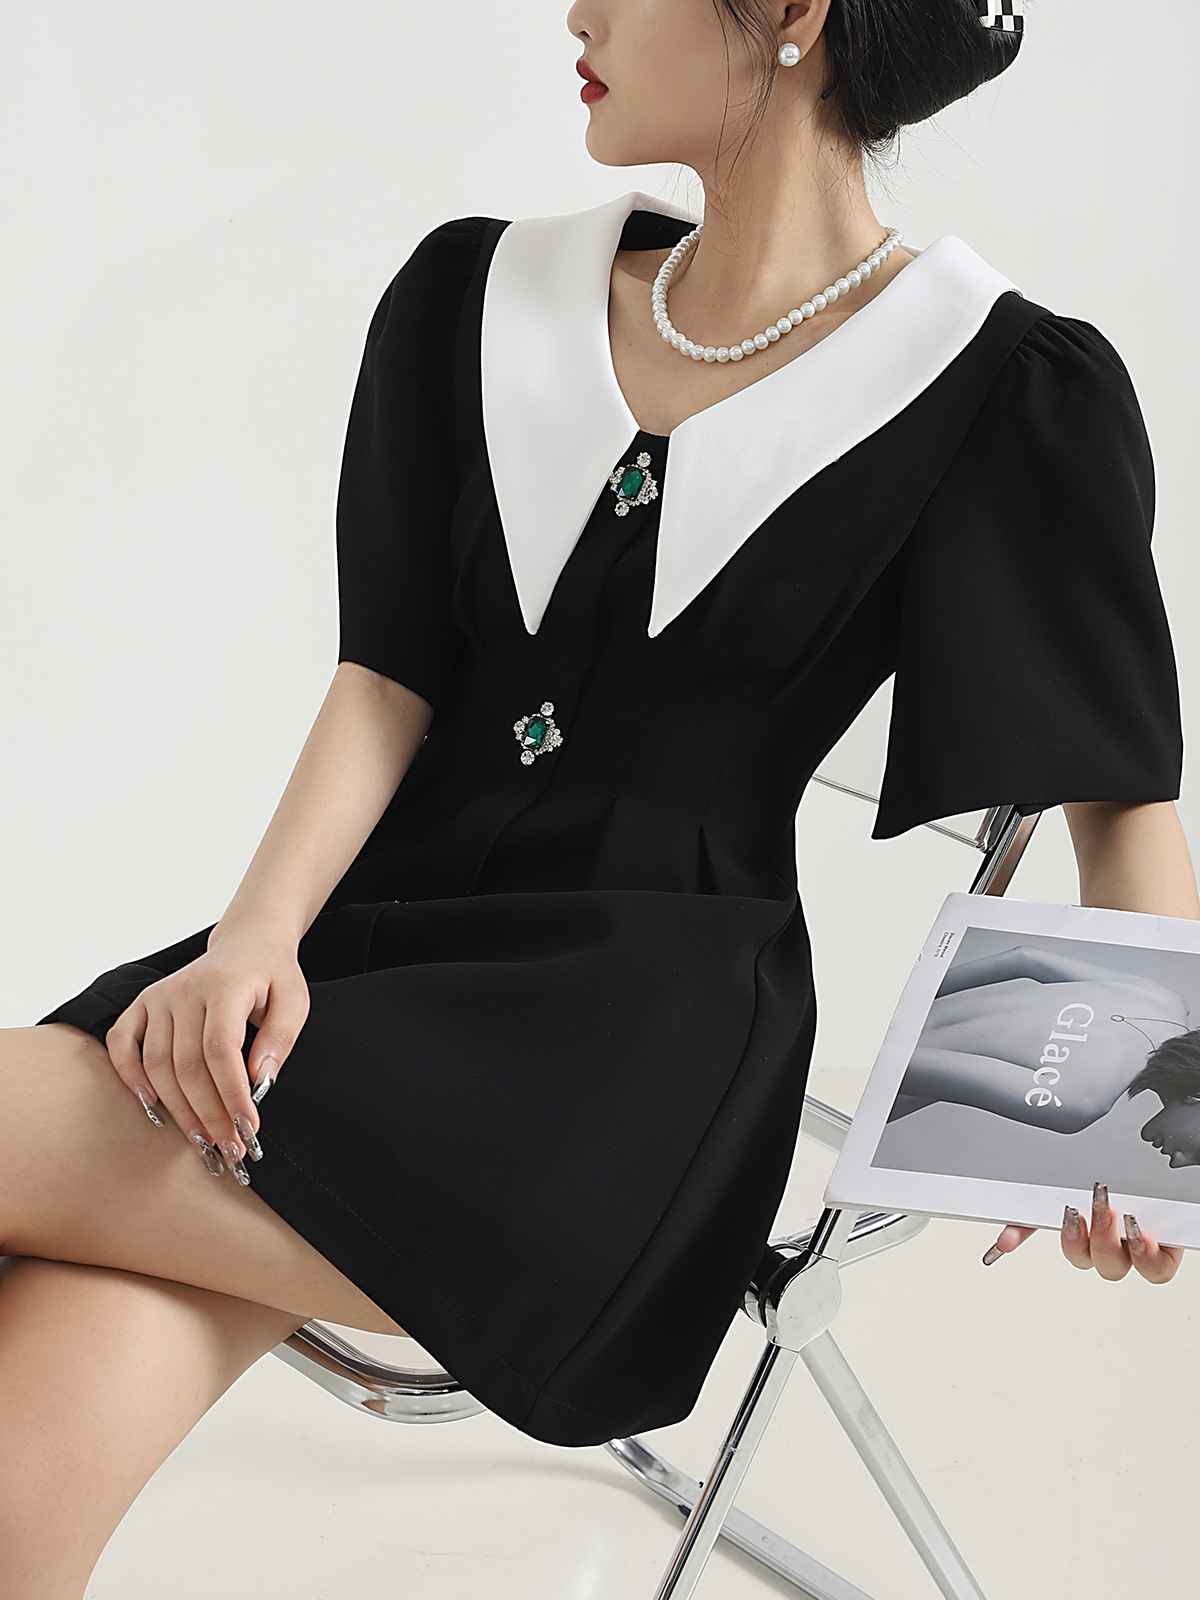 G-IDLE Miyeon Inspired Black French Collared Dress